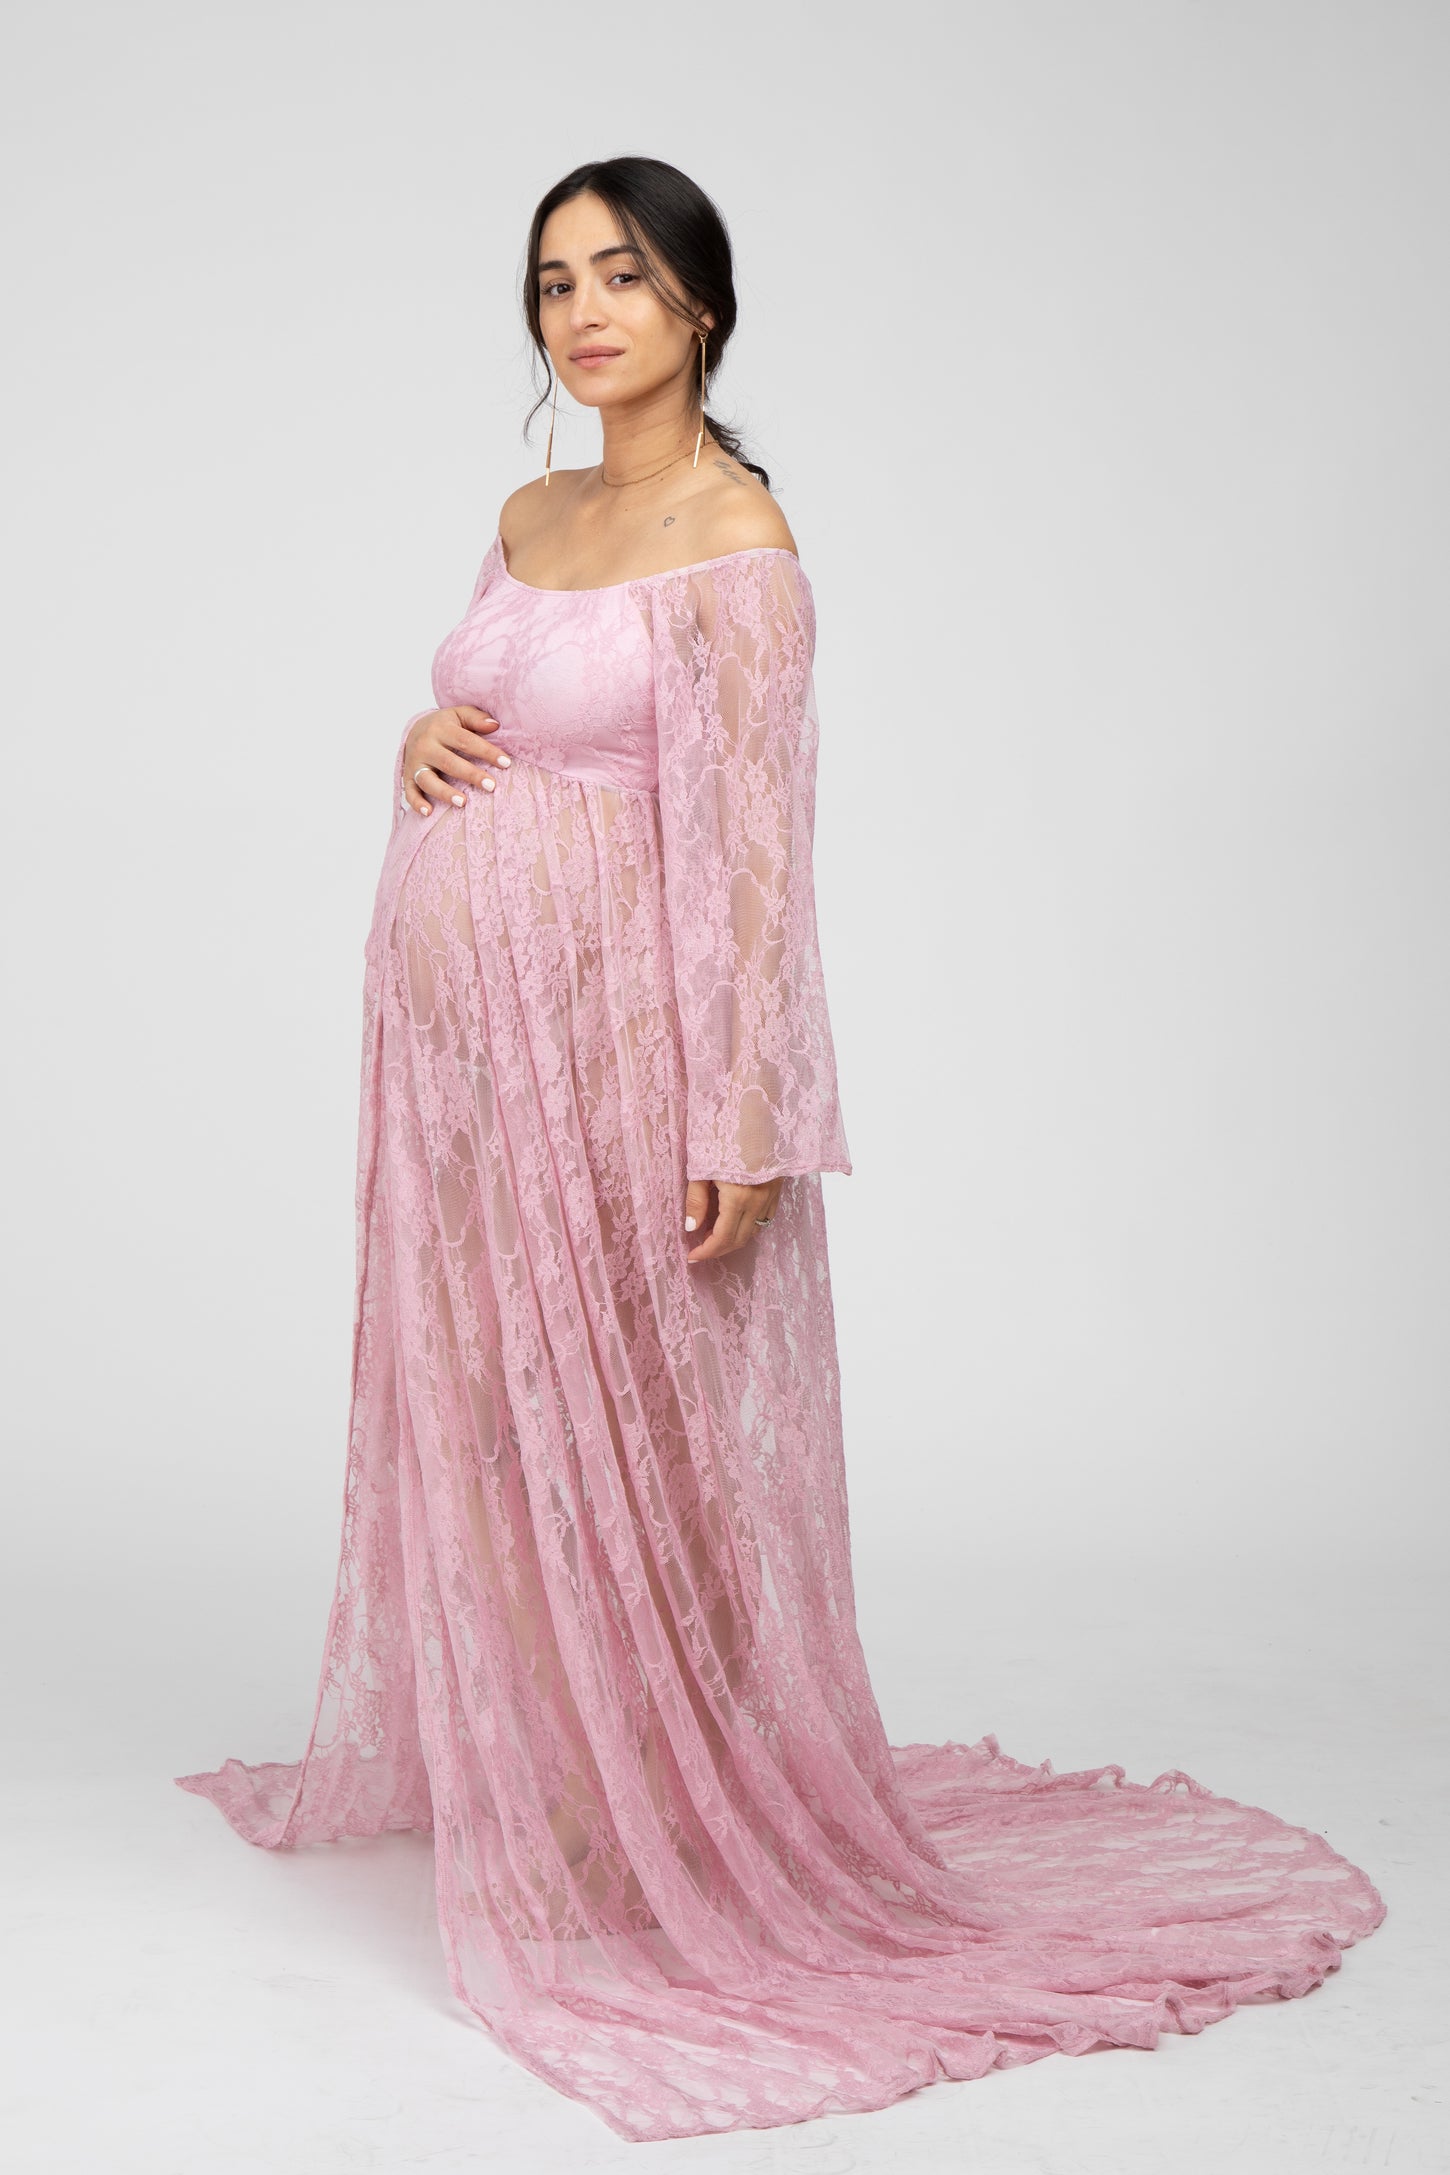 Leilani long lace maternity dress - Miss Madison Boutique Maternity,  Pregnancy Gowns, Dresses for Photography, Photoshoot, Bridesmaid, Babyshower